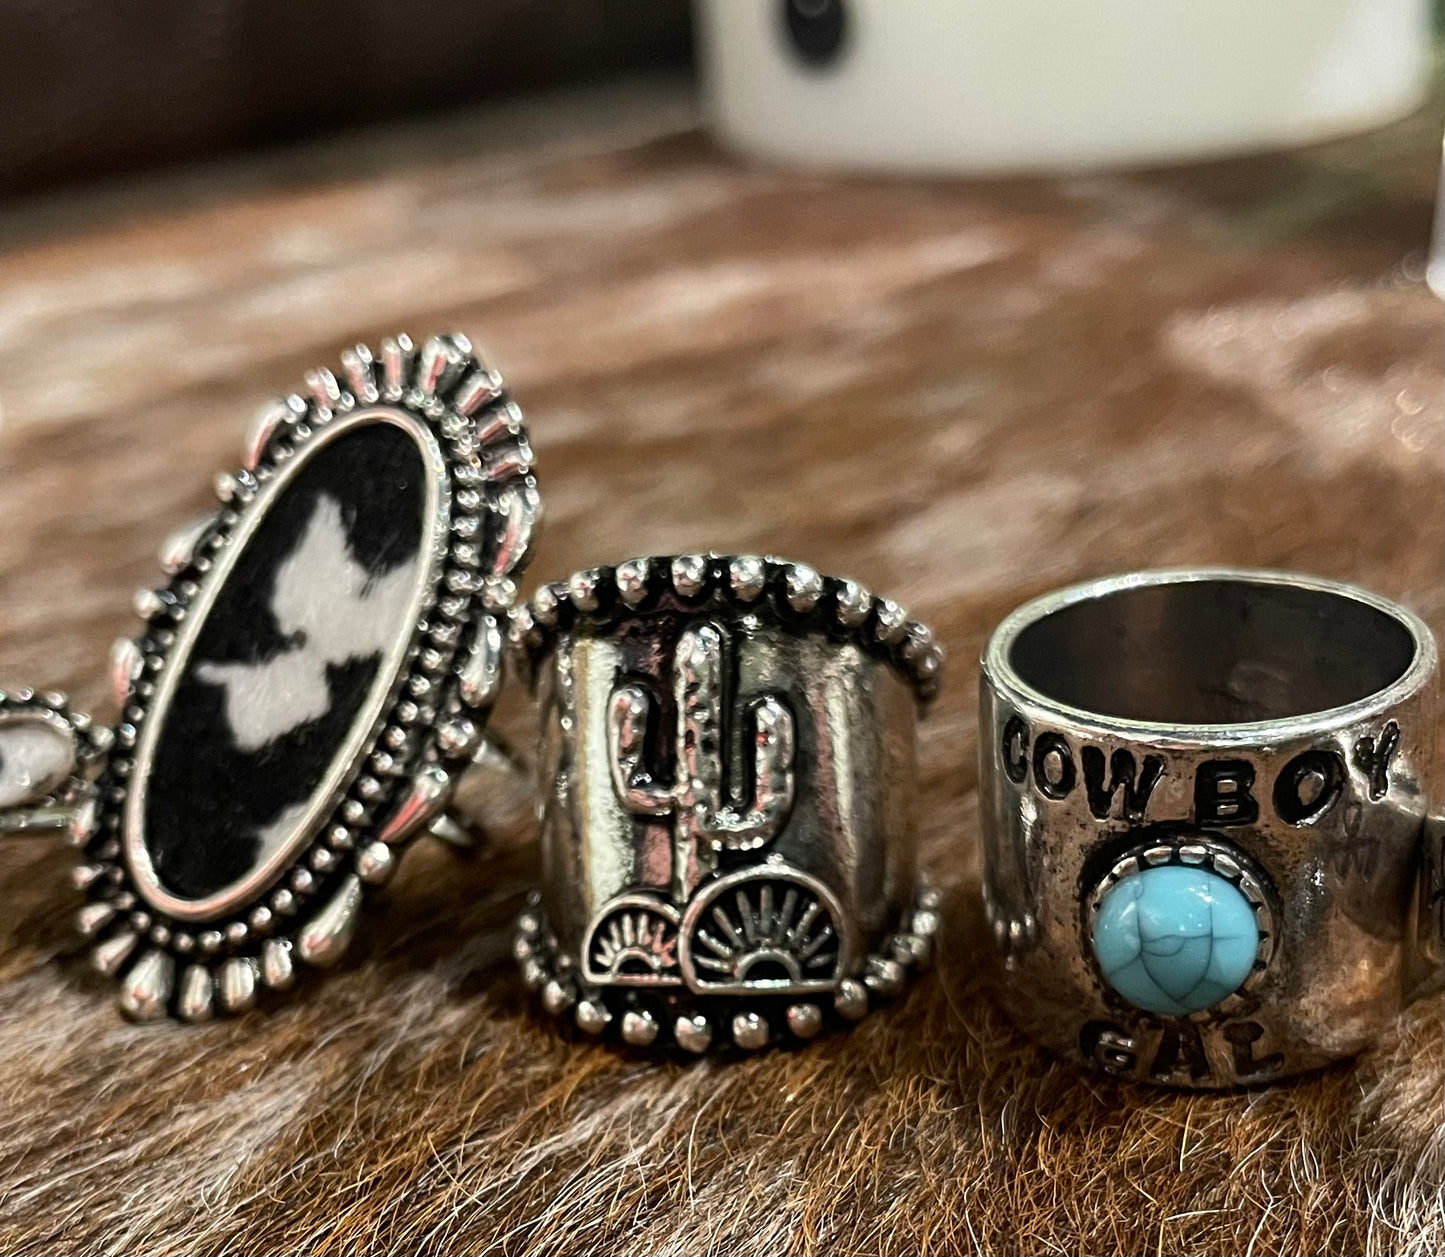 Large and in Charge Rings